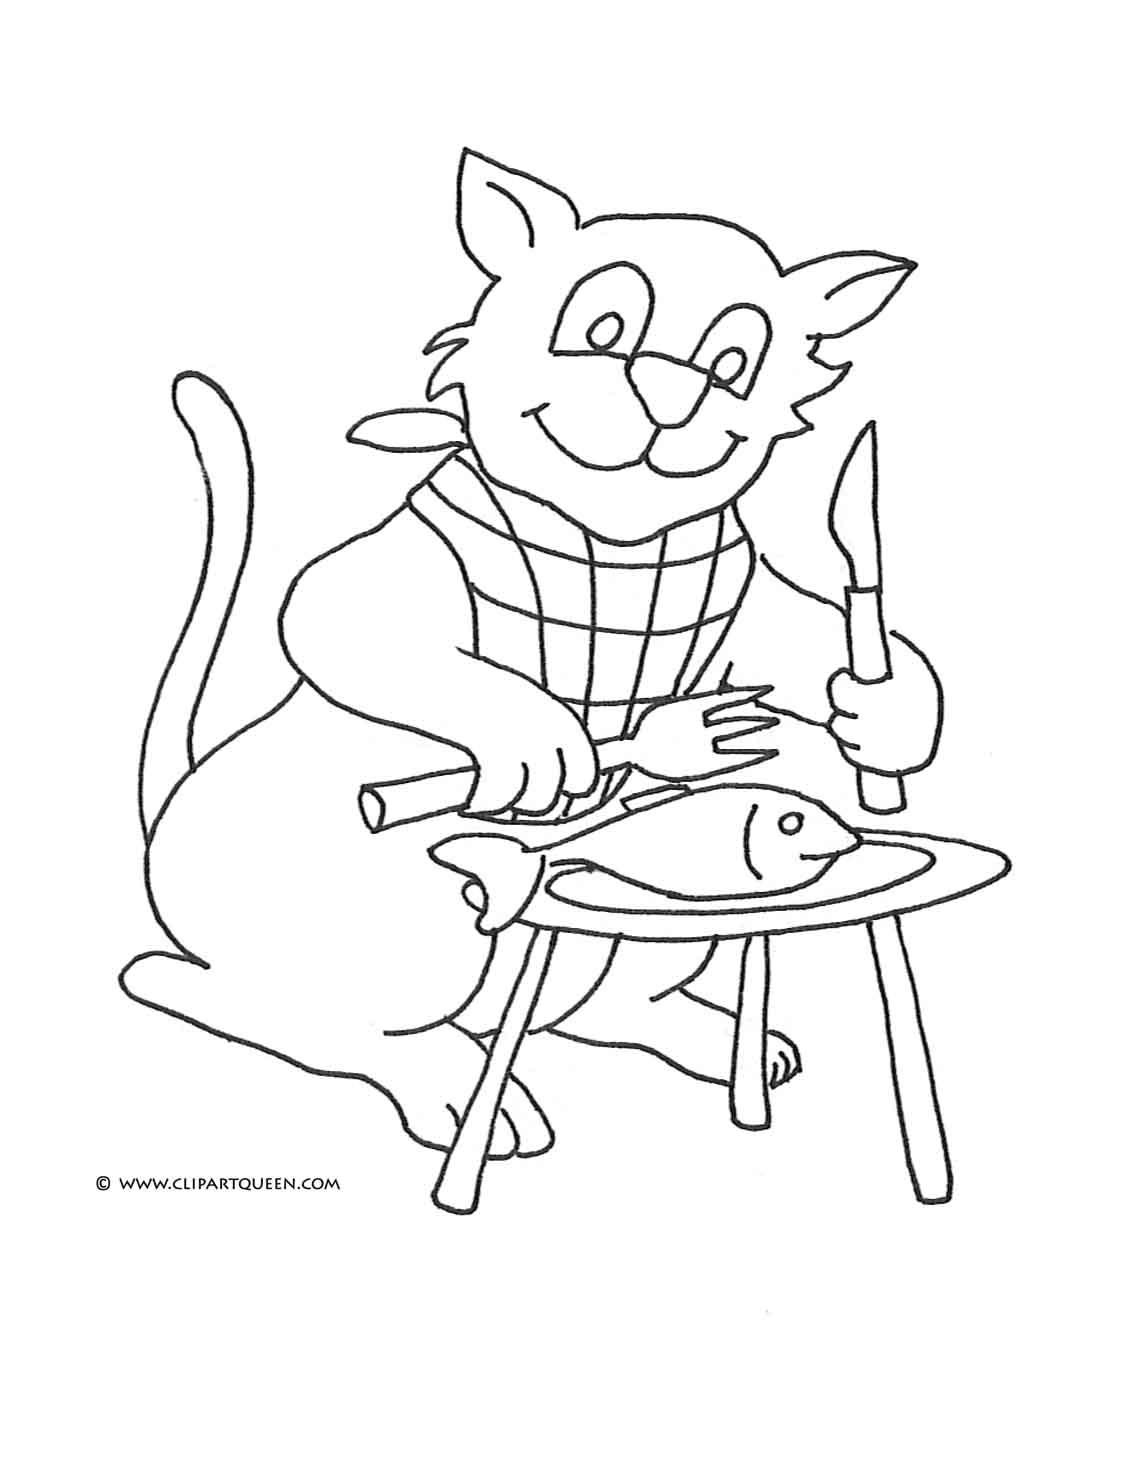 cat coloring page cat eating fish with fork